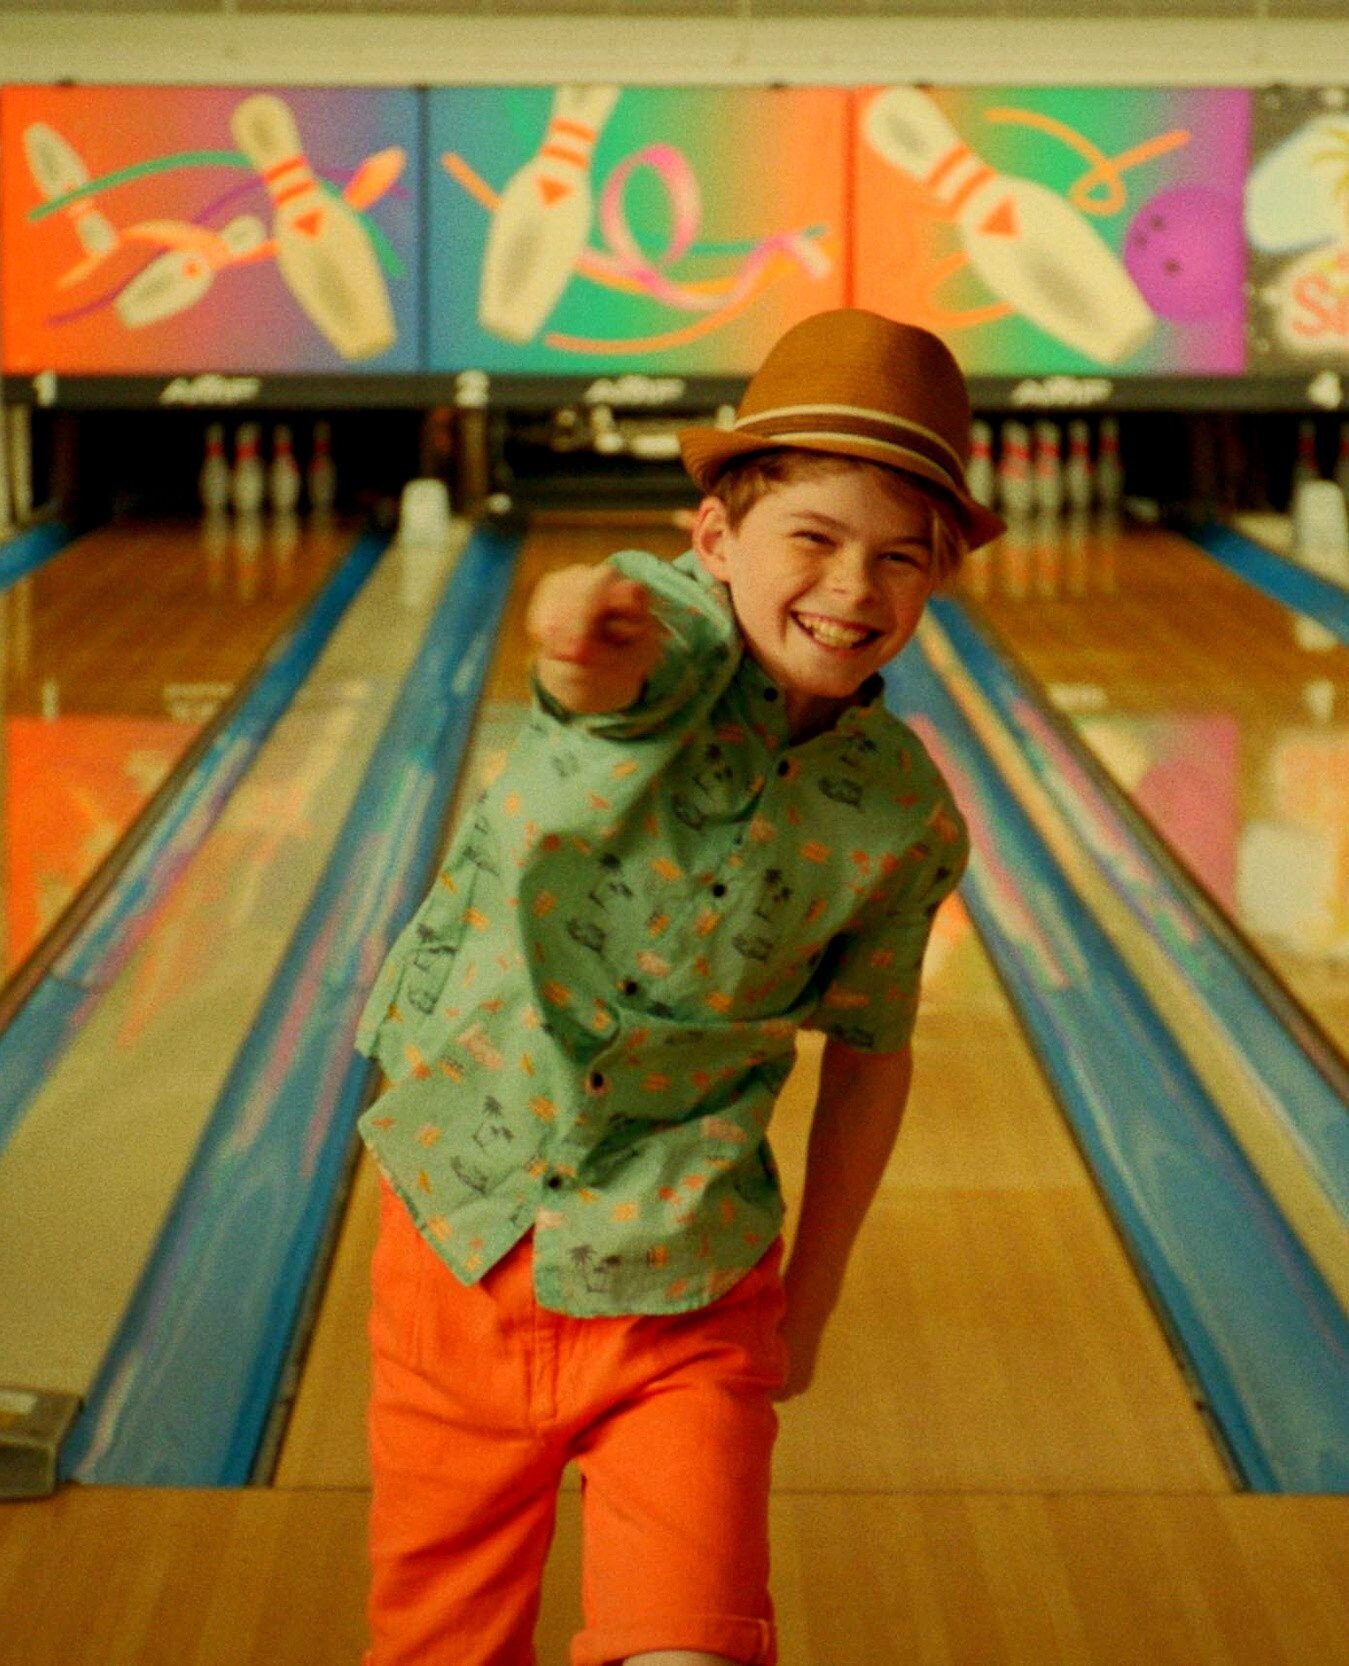 Merrick Hanna's never bowled before.⁠
⁠
He practiced so he could get a strike while we were rolling.⁠
⁠
Merrick Hanna got the strike.⁠
⁠
Merrick is amazing! ⁠
⁠
The whole short film is on our YouTube. ⁠
⁠
He's got 16.5 million subscribers on his chan